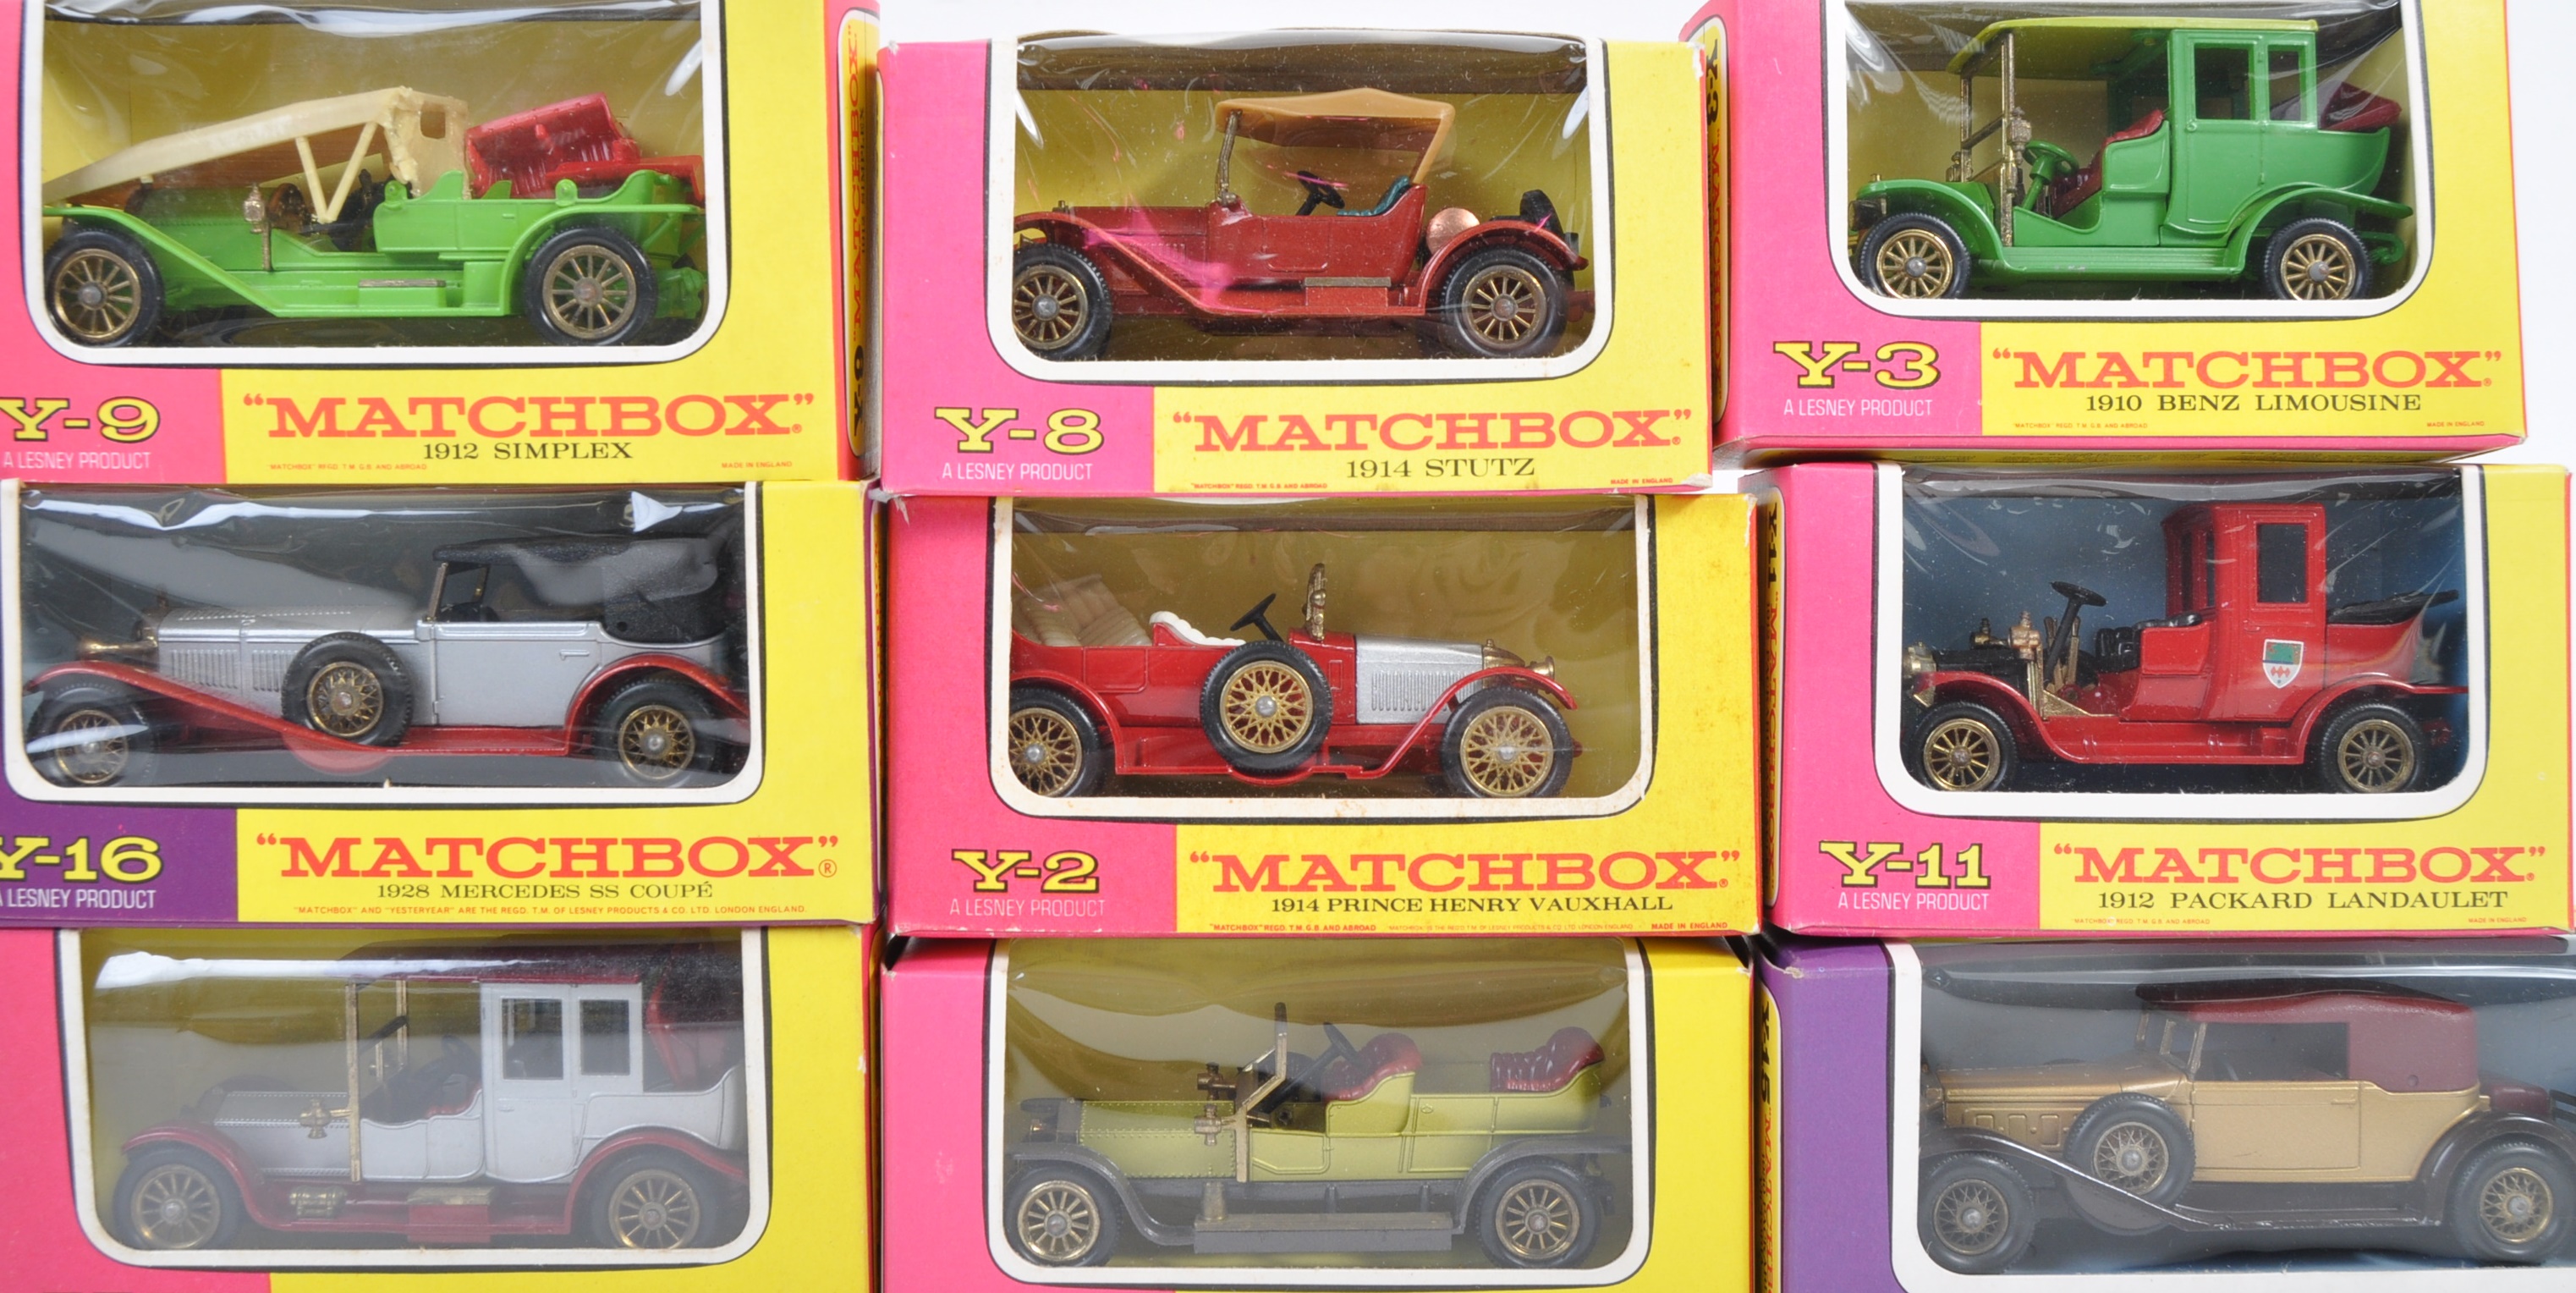 COLLECTION OF MATCHBOX MODELS OF YESTERYEAR BOXED DIECAST - Image 5 of 6